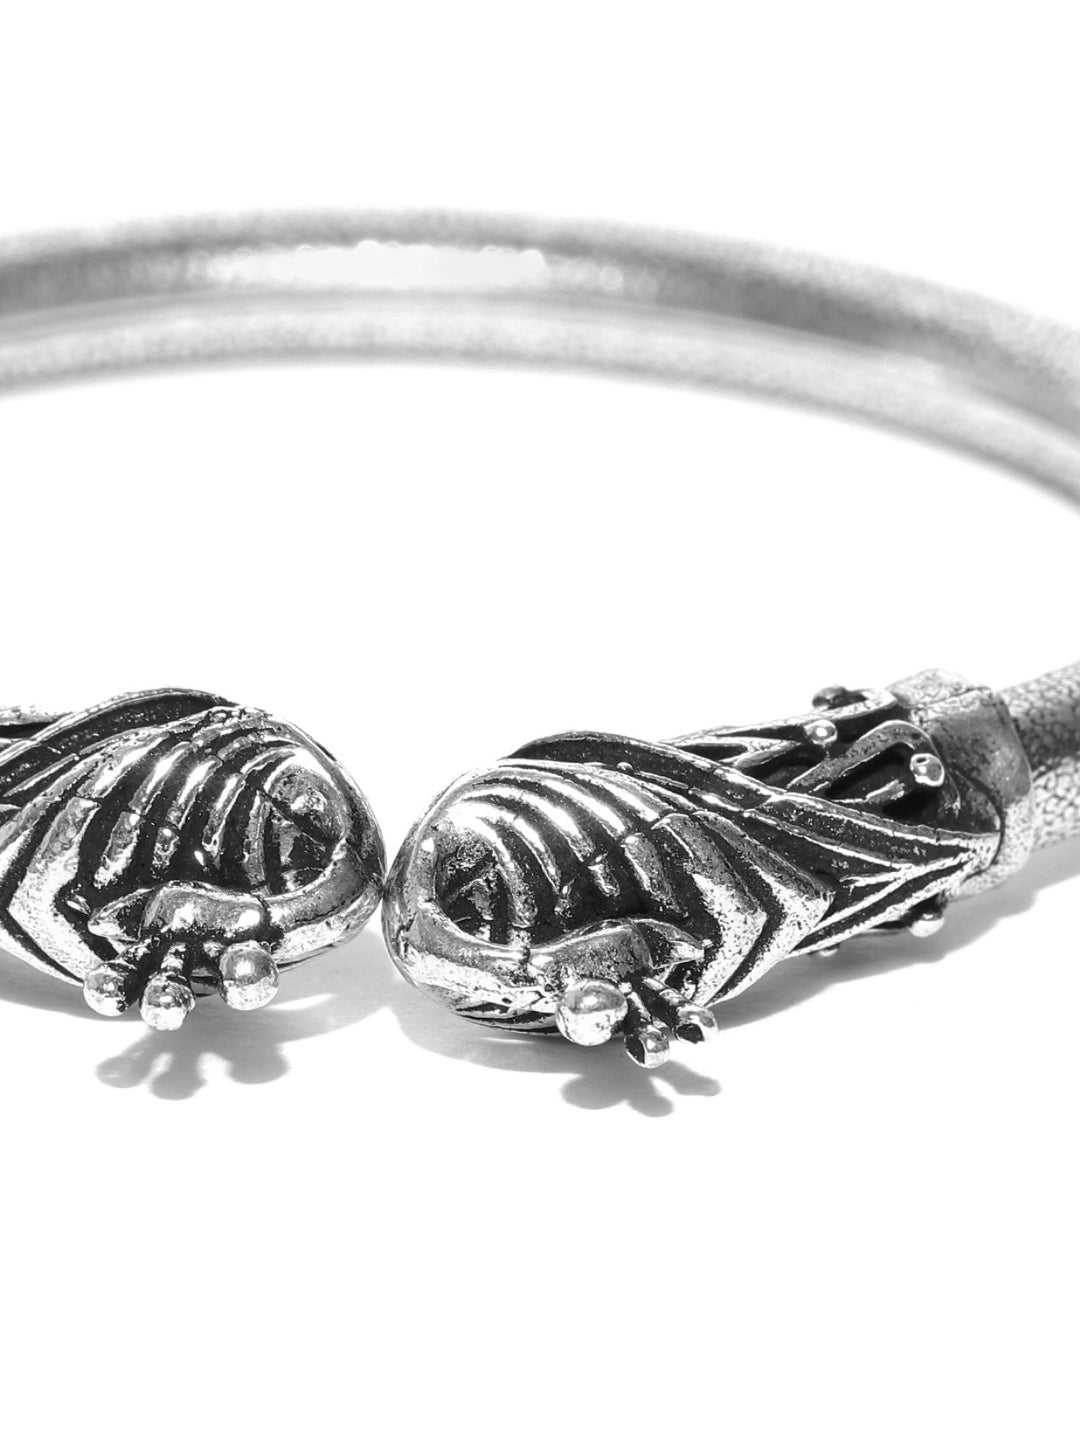 Oxidized Peacock Inspired German Silver Bracelet For Girls And Women